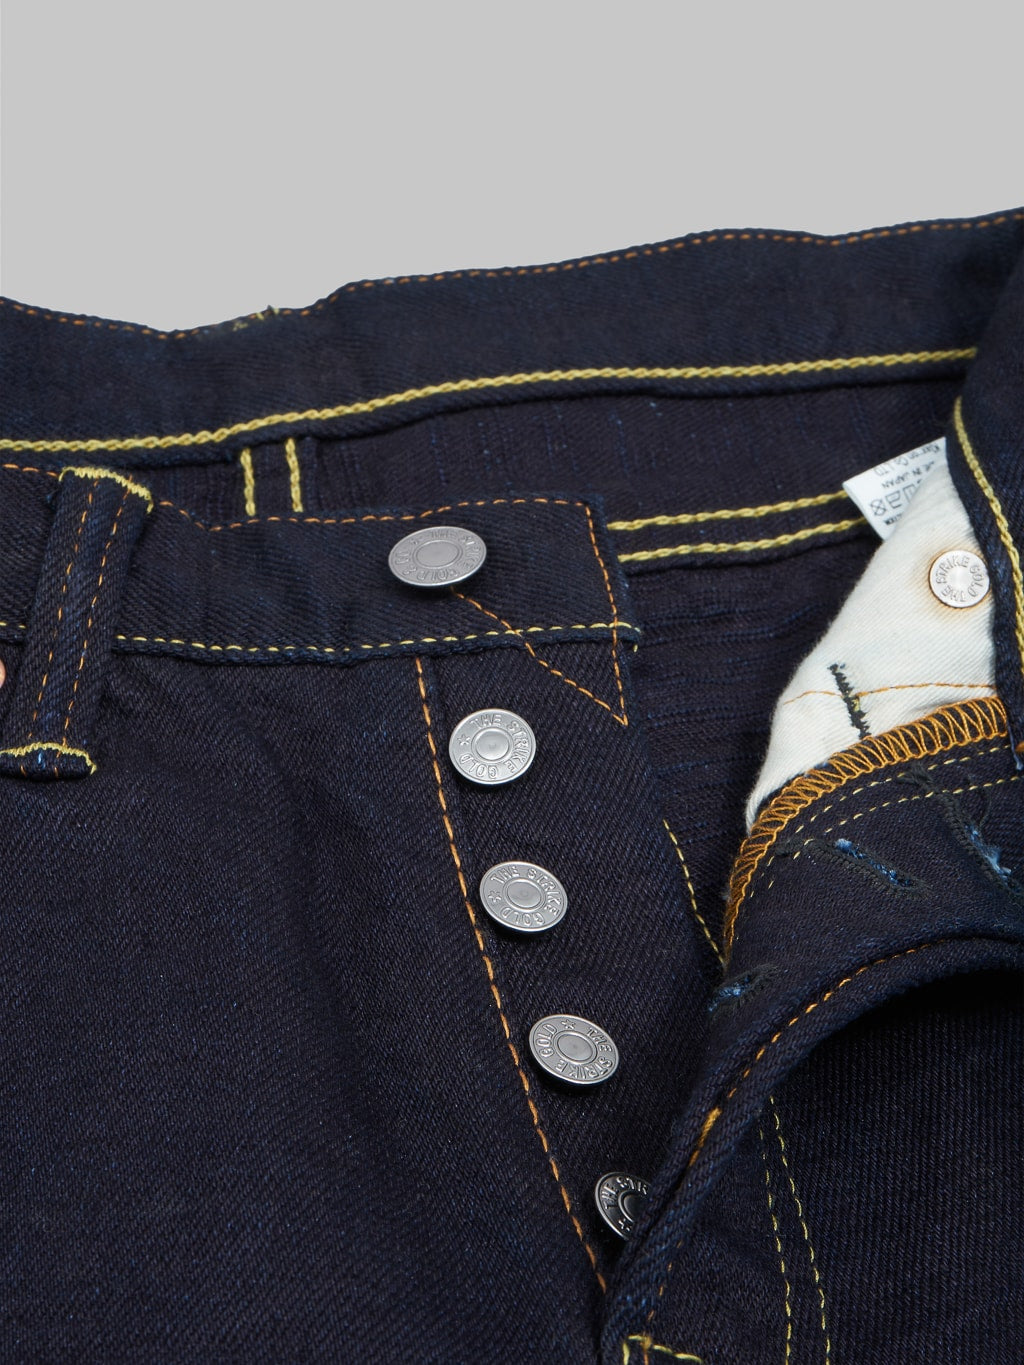 The Strike Gold 5004ID double indigo selvedge jeans iron buttons